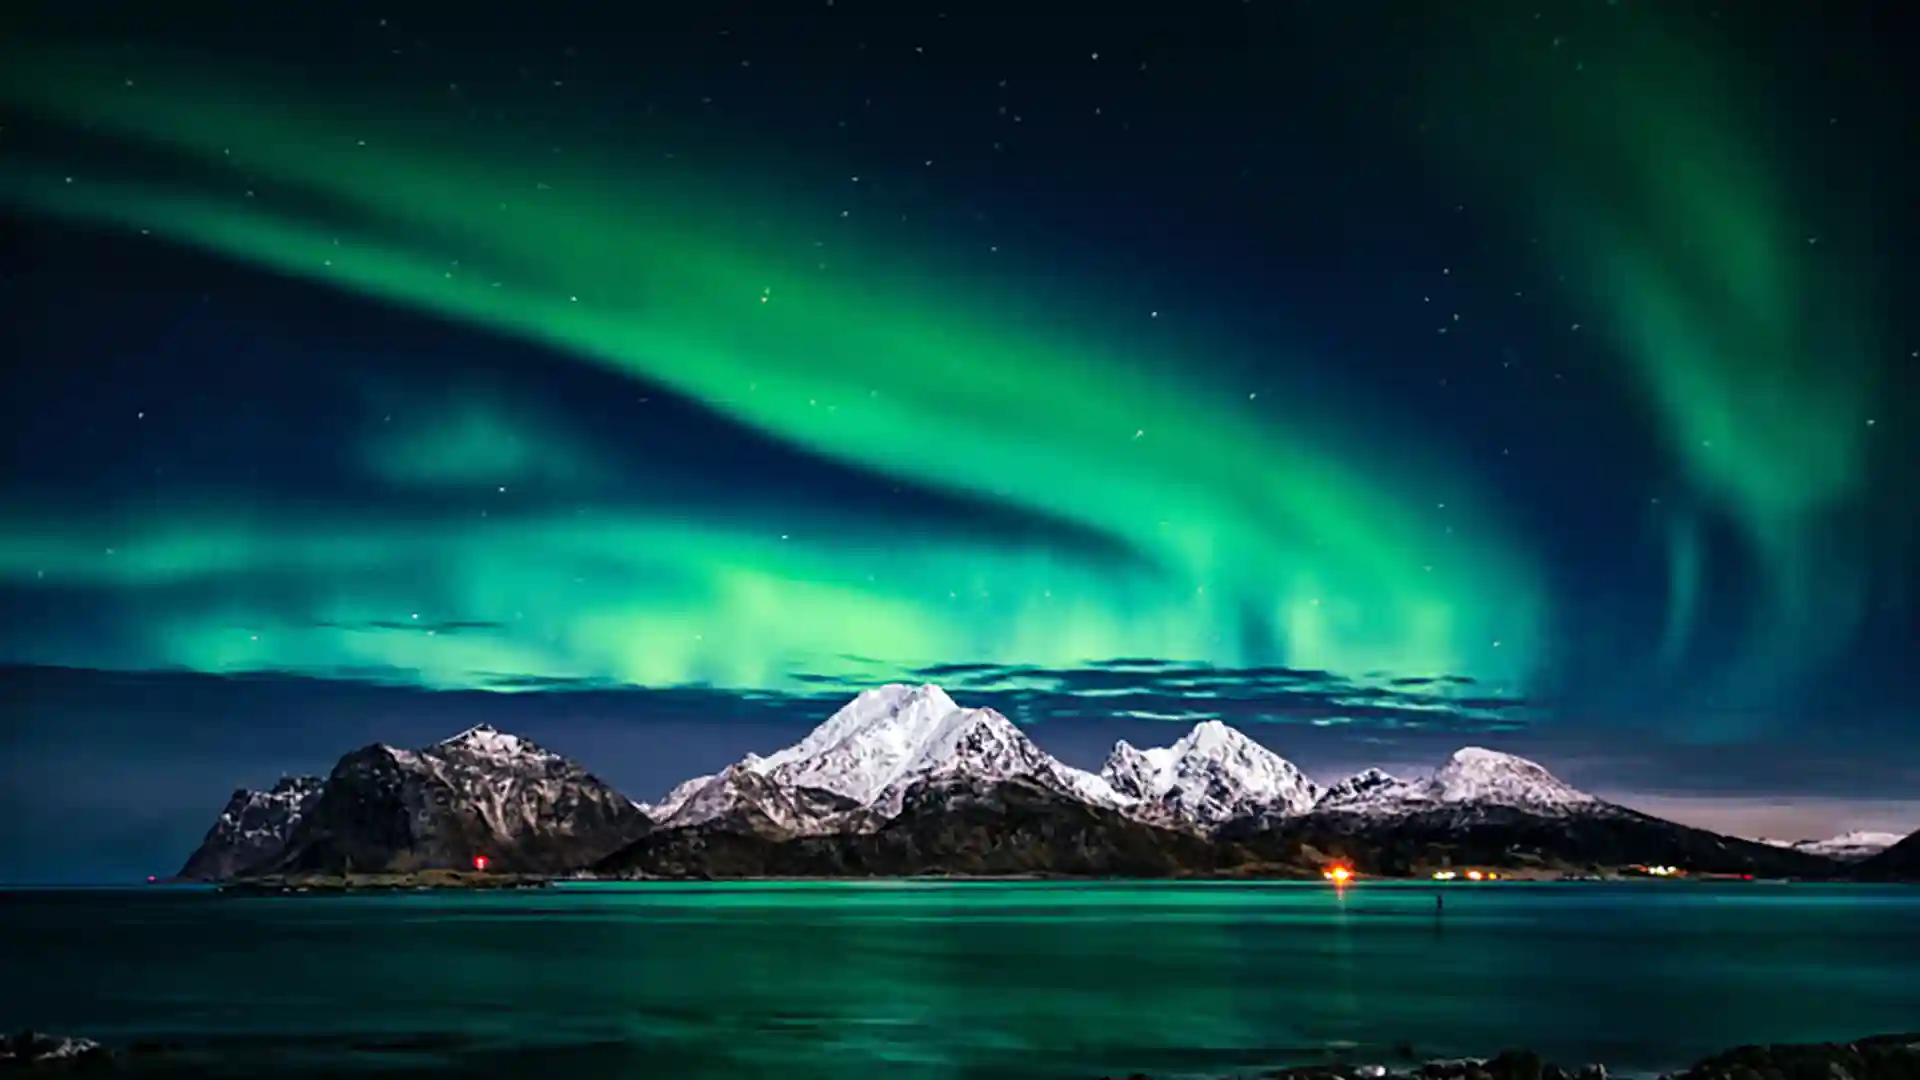 View of northern lights in green hues above Norway.